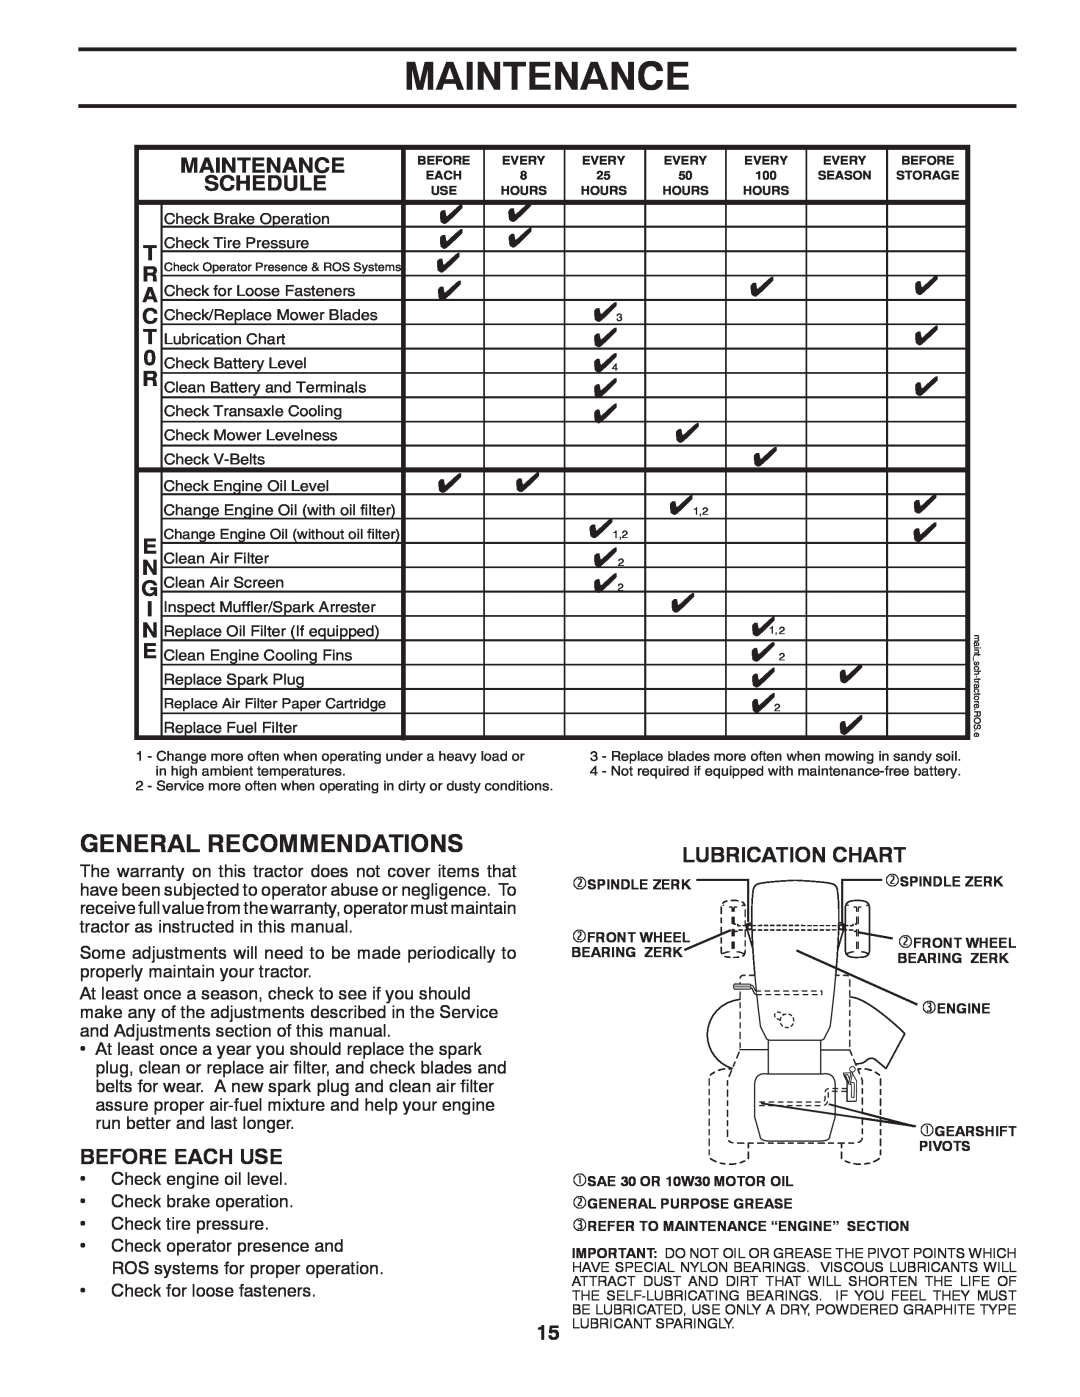 Poulan pb19546lt manual Maintenance, General Recommendations, Schedule, Before Each Use, Lubrication Chart 